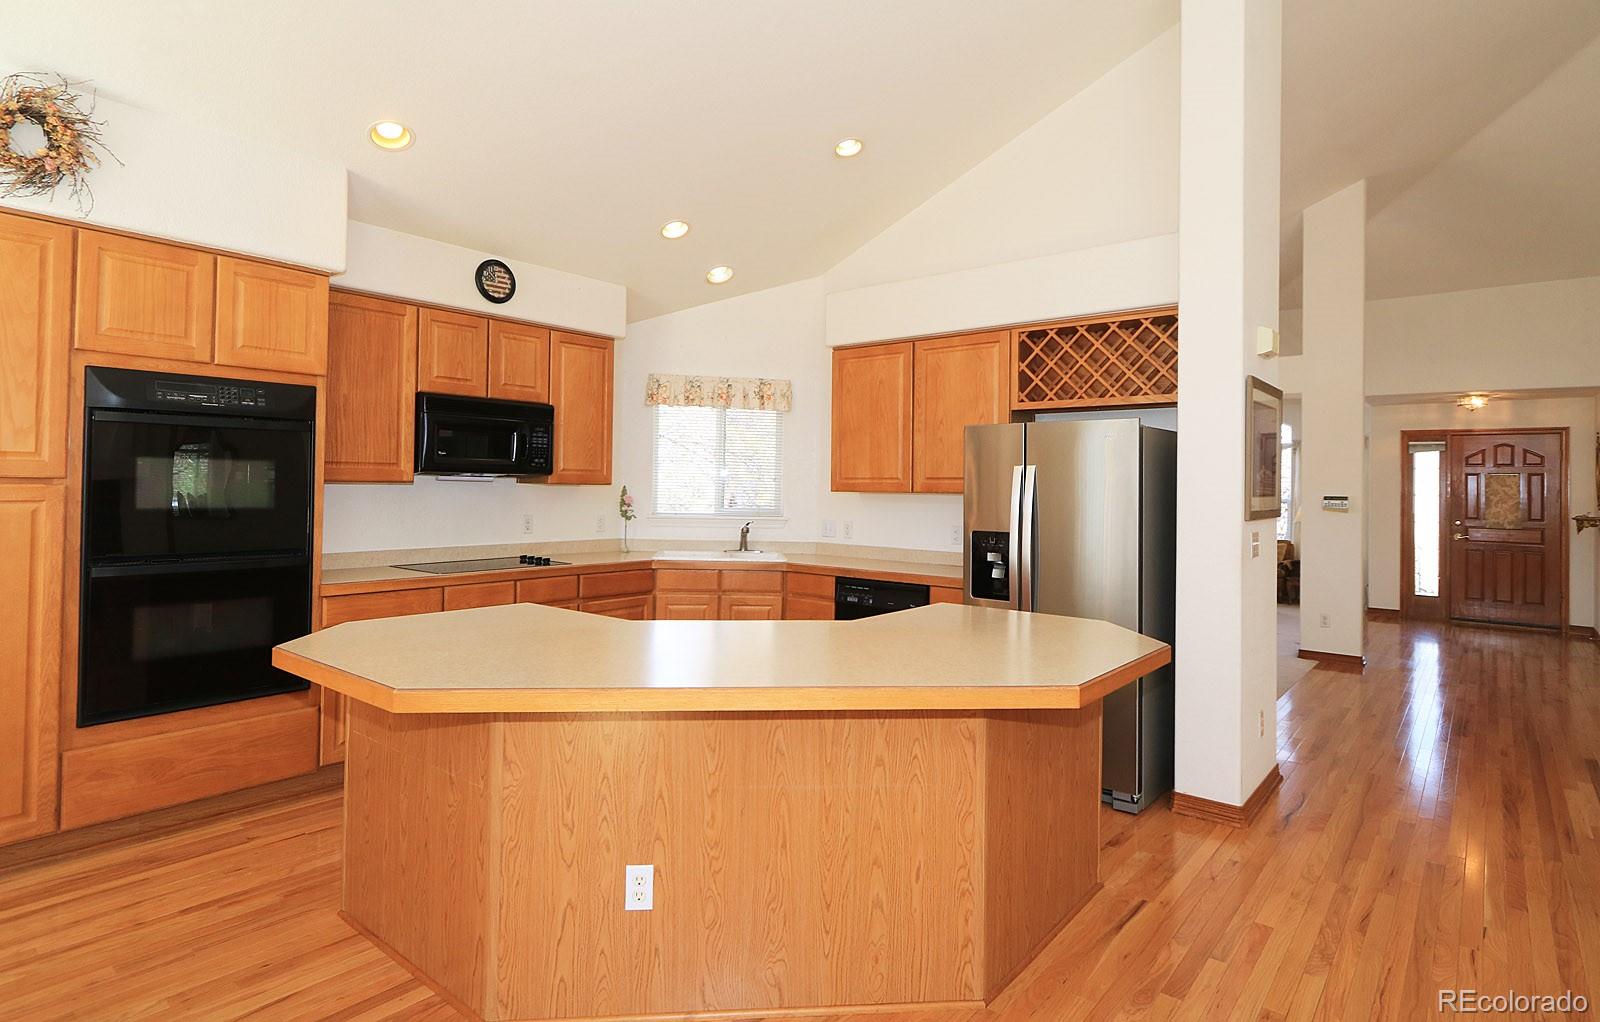 Capacious kitchen with island